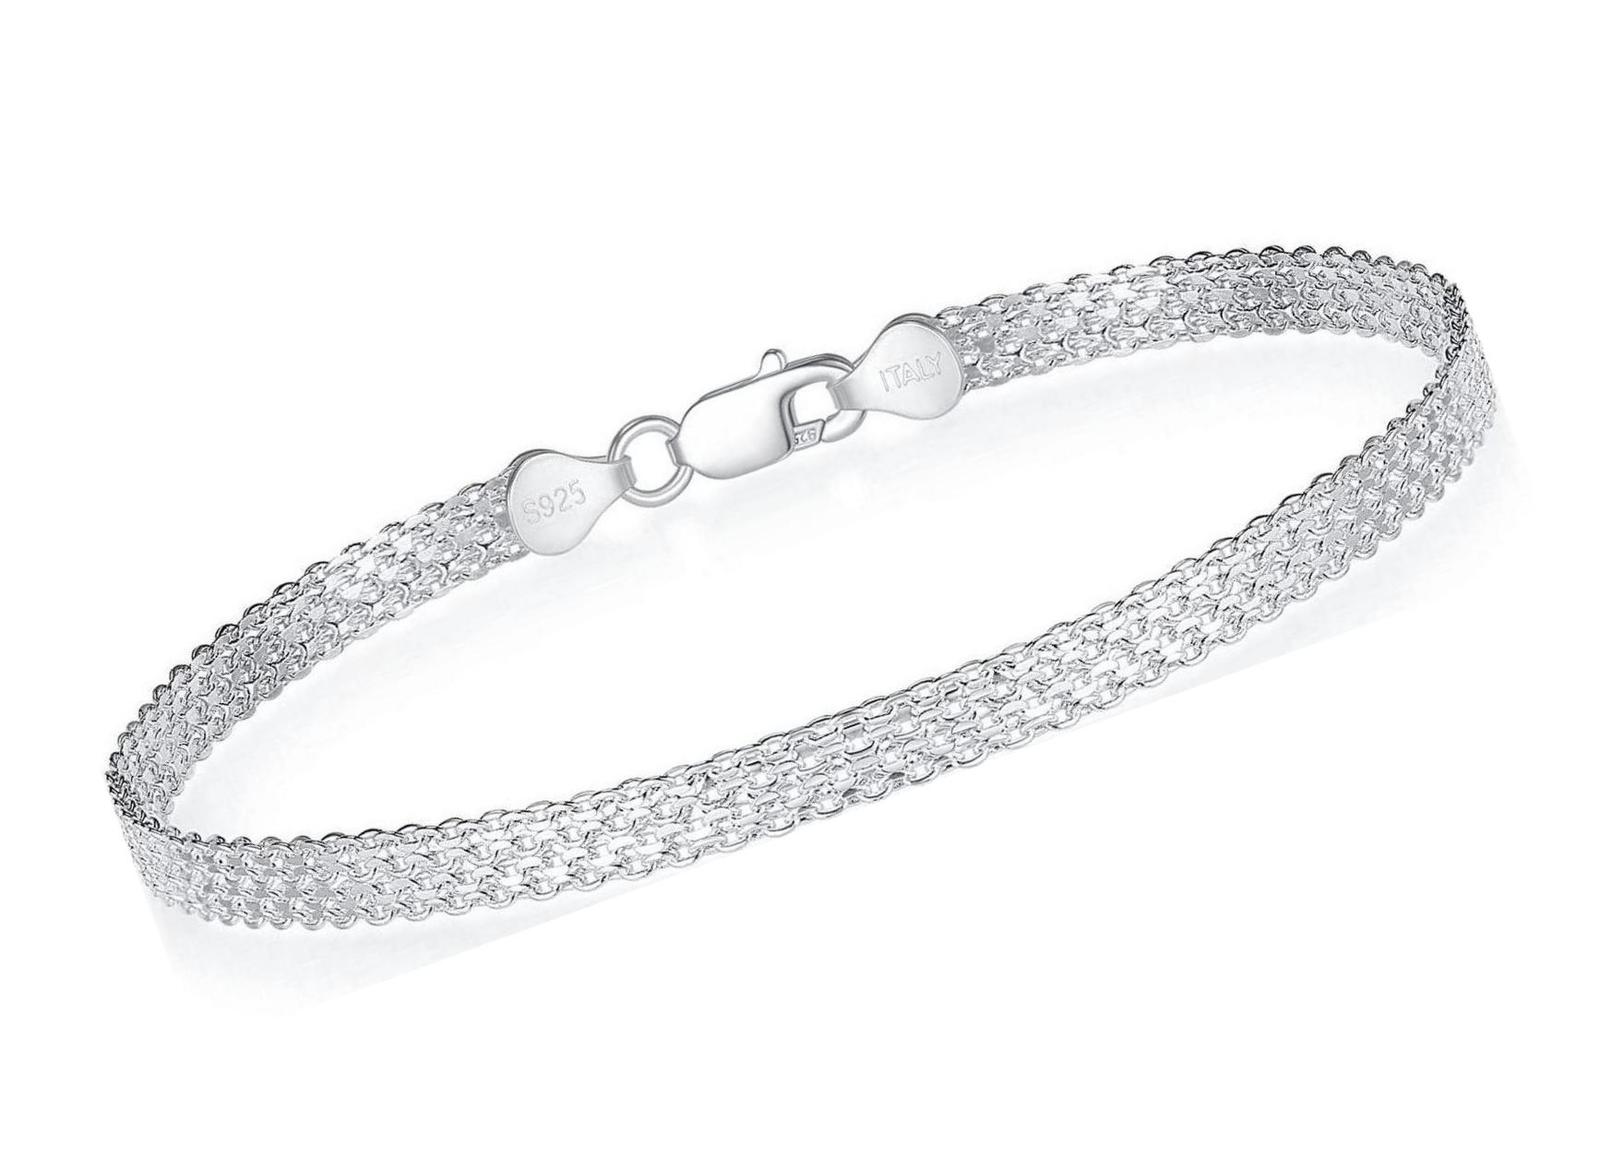 Primary image for 925 Sterling Silver Clasp 4.5mm Mesh Link Chain Bracelets